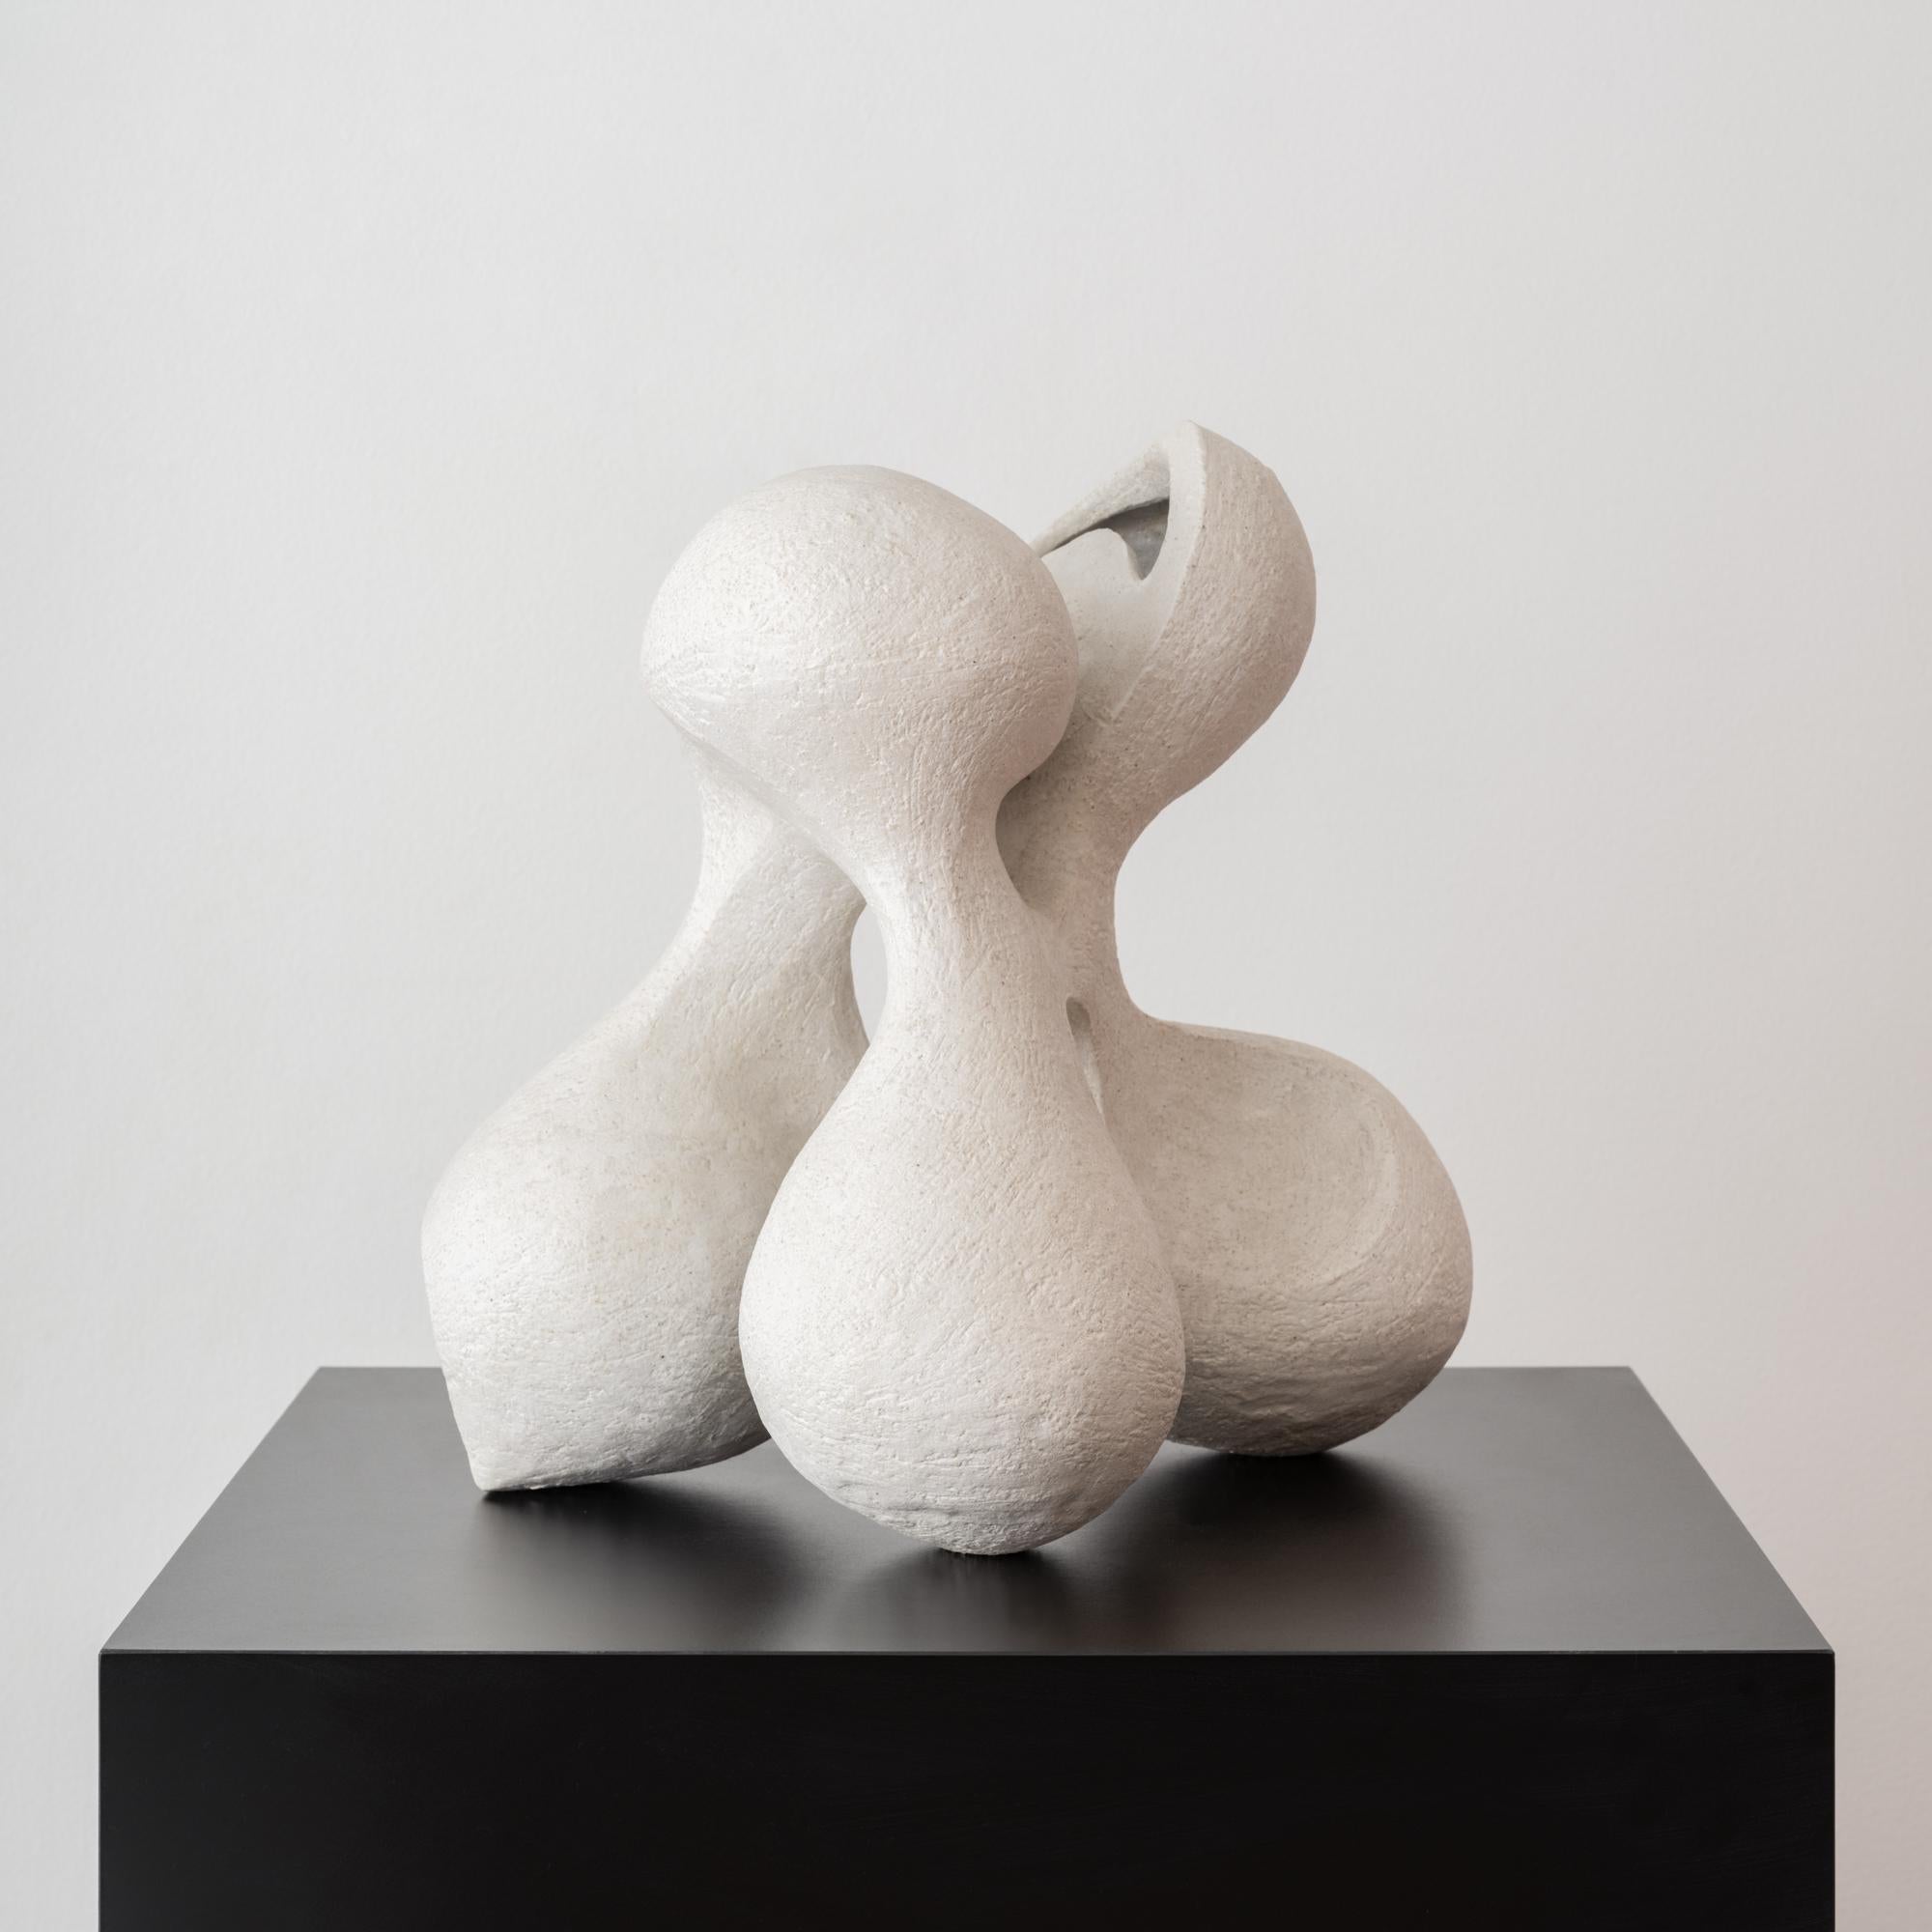 Abstract Tabletop Sculpture in Contemporary Organic White Ceramic In New Condition For Sale In New York, NY